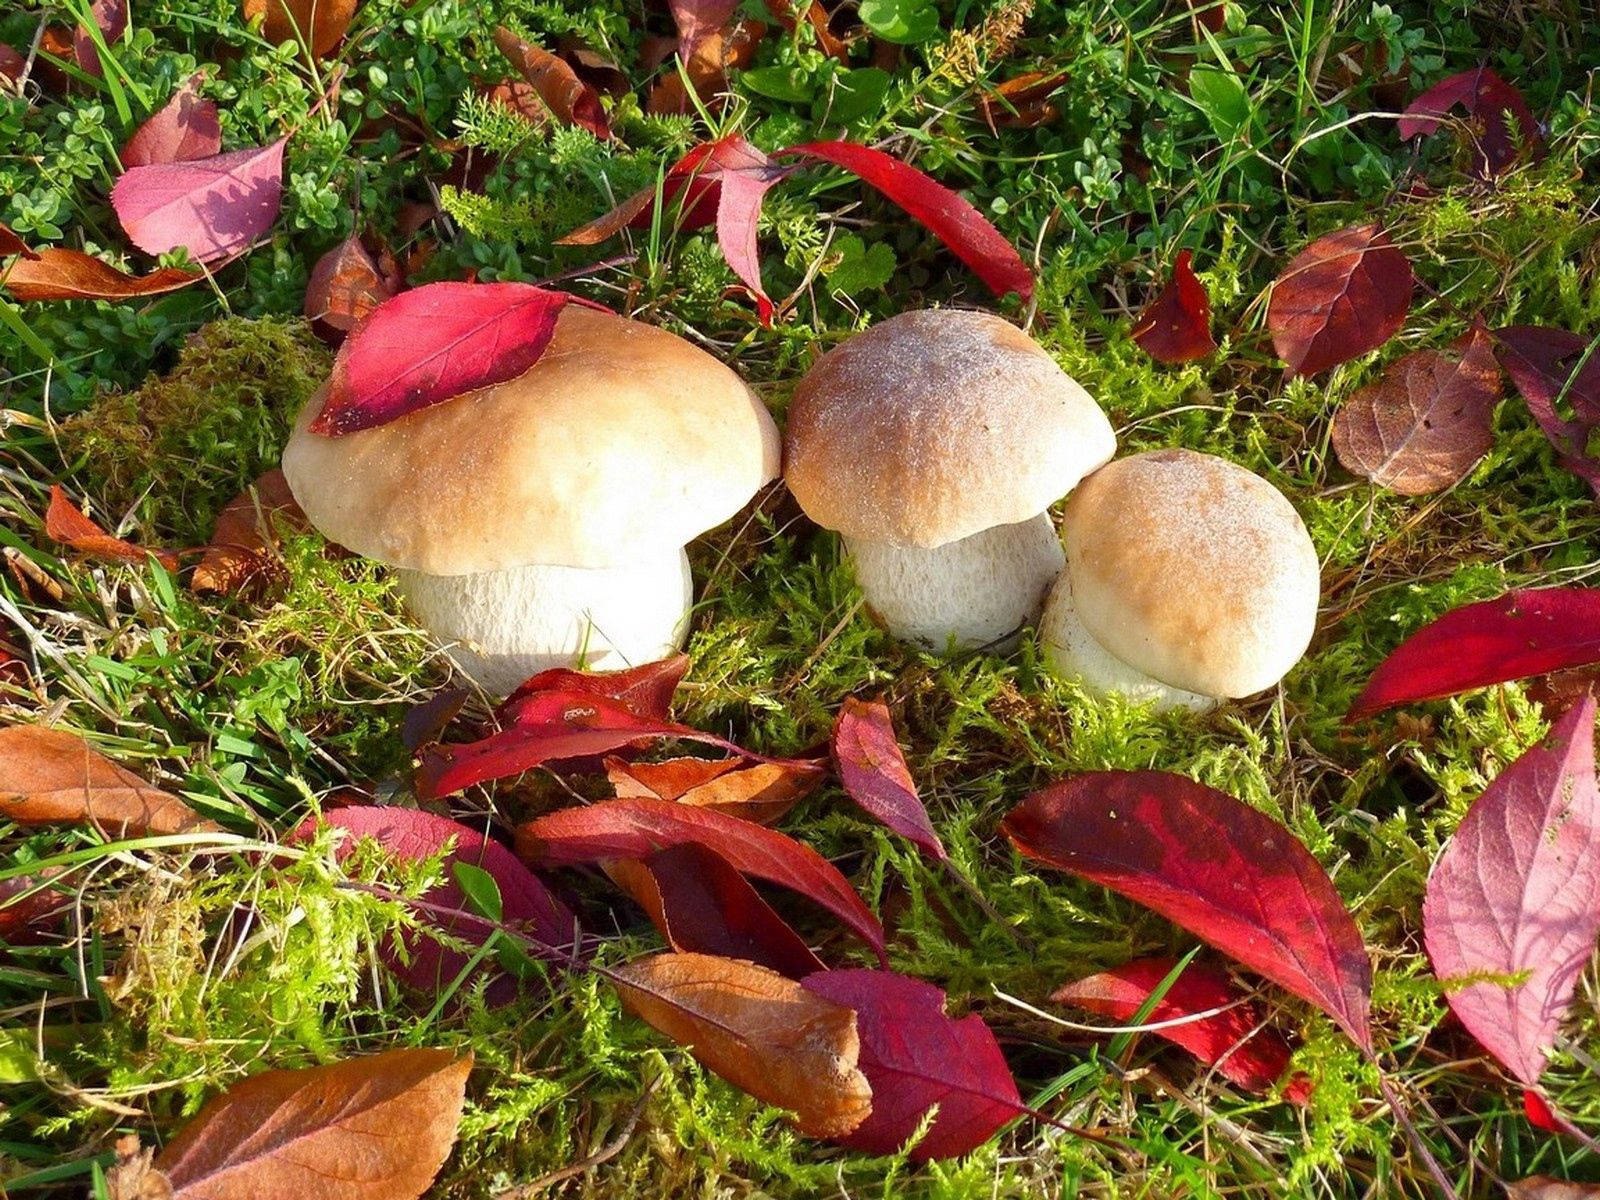 A Beautiful Autumn Day In The Forest Filled With Wild Mushrooms